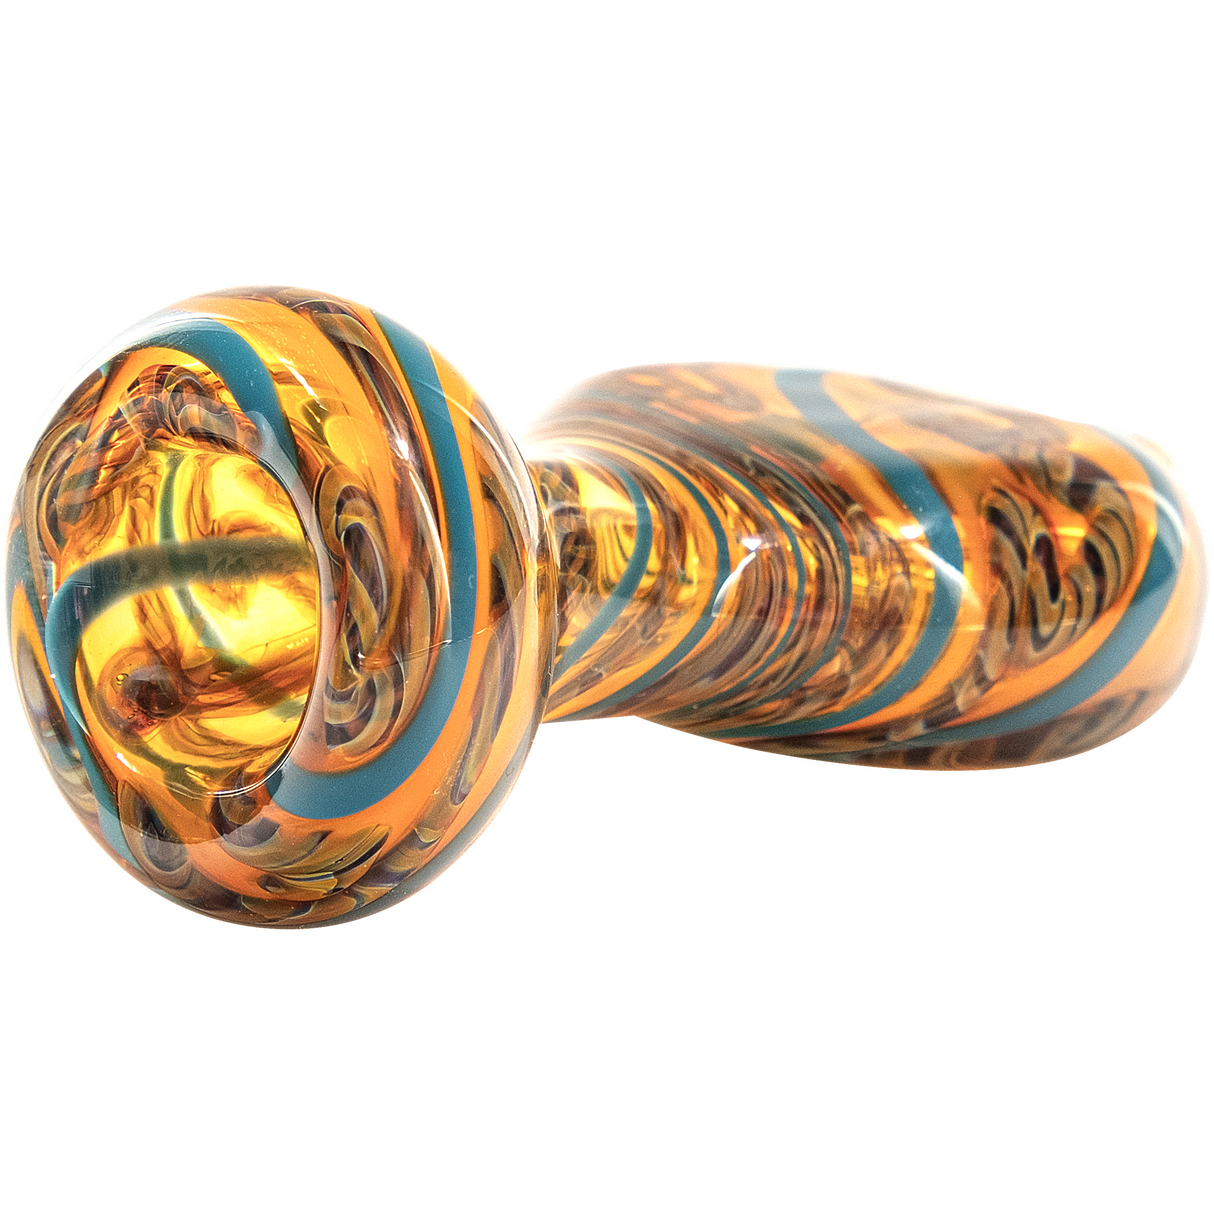 LA Pipes "Flat Belly" Inside-Out Chillum in Fumed Color Changing Glass, Compact Design, USA Made